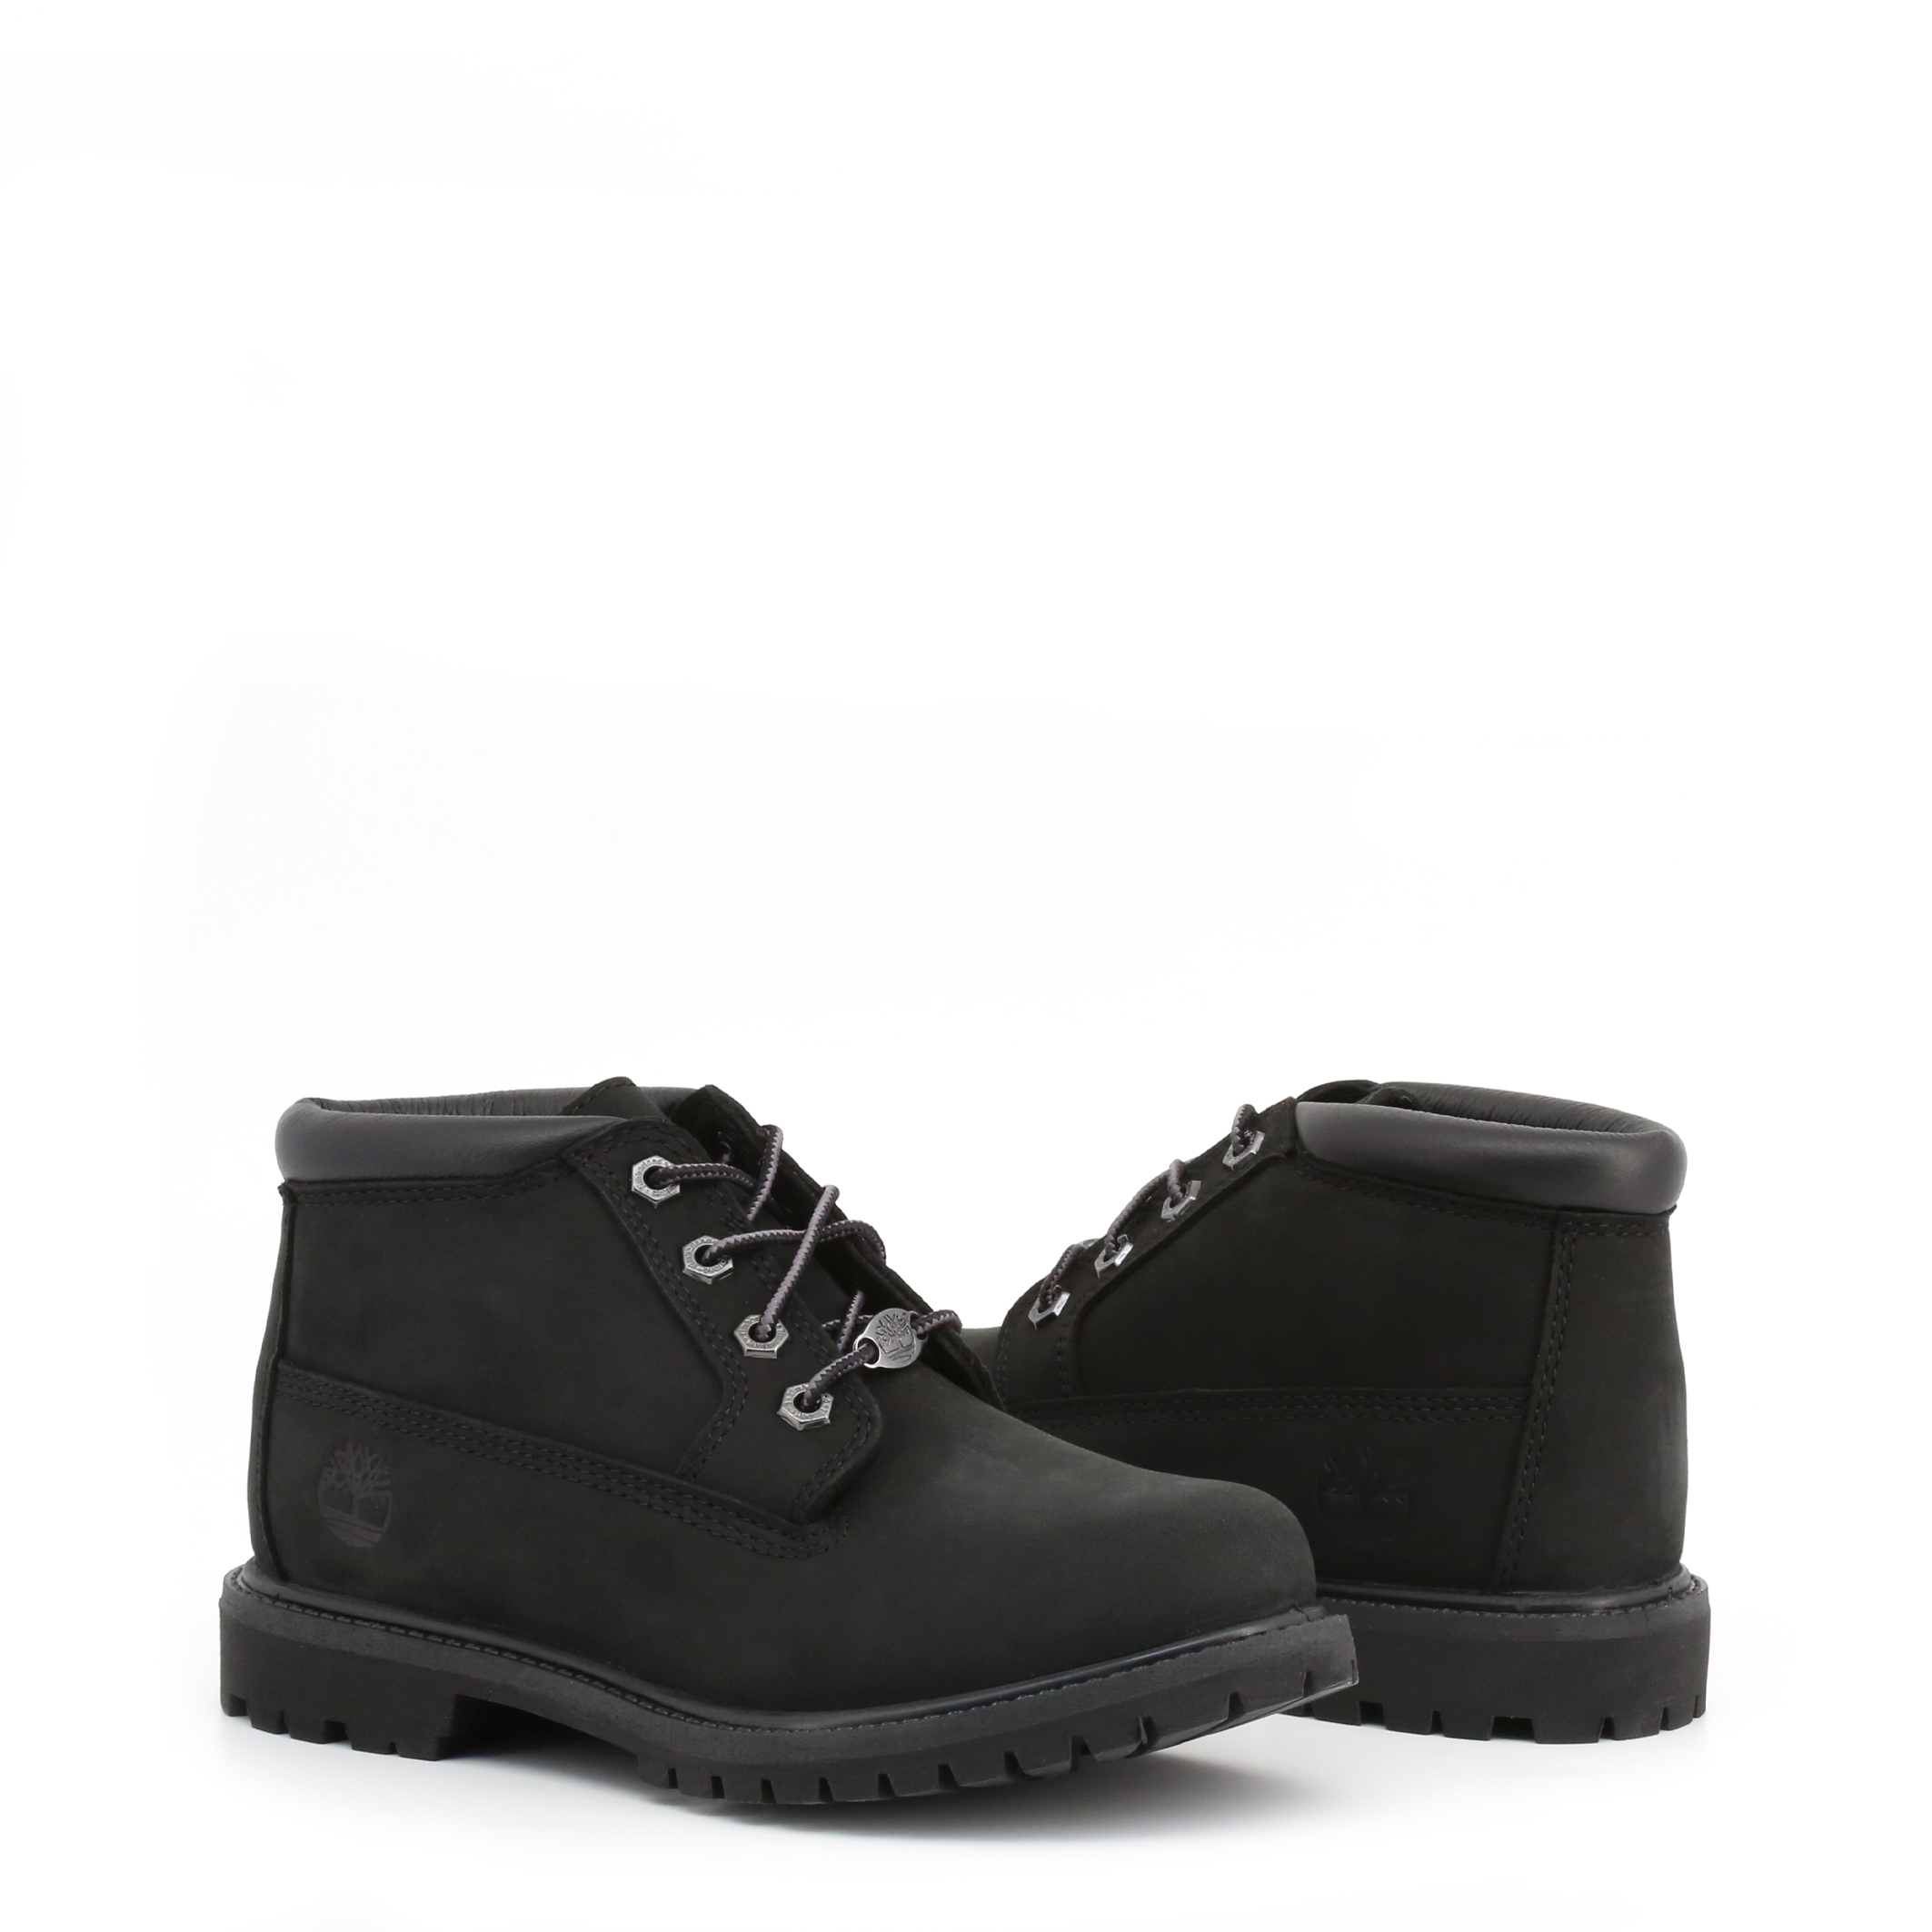 timberland womens ankle boots sale